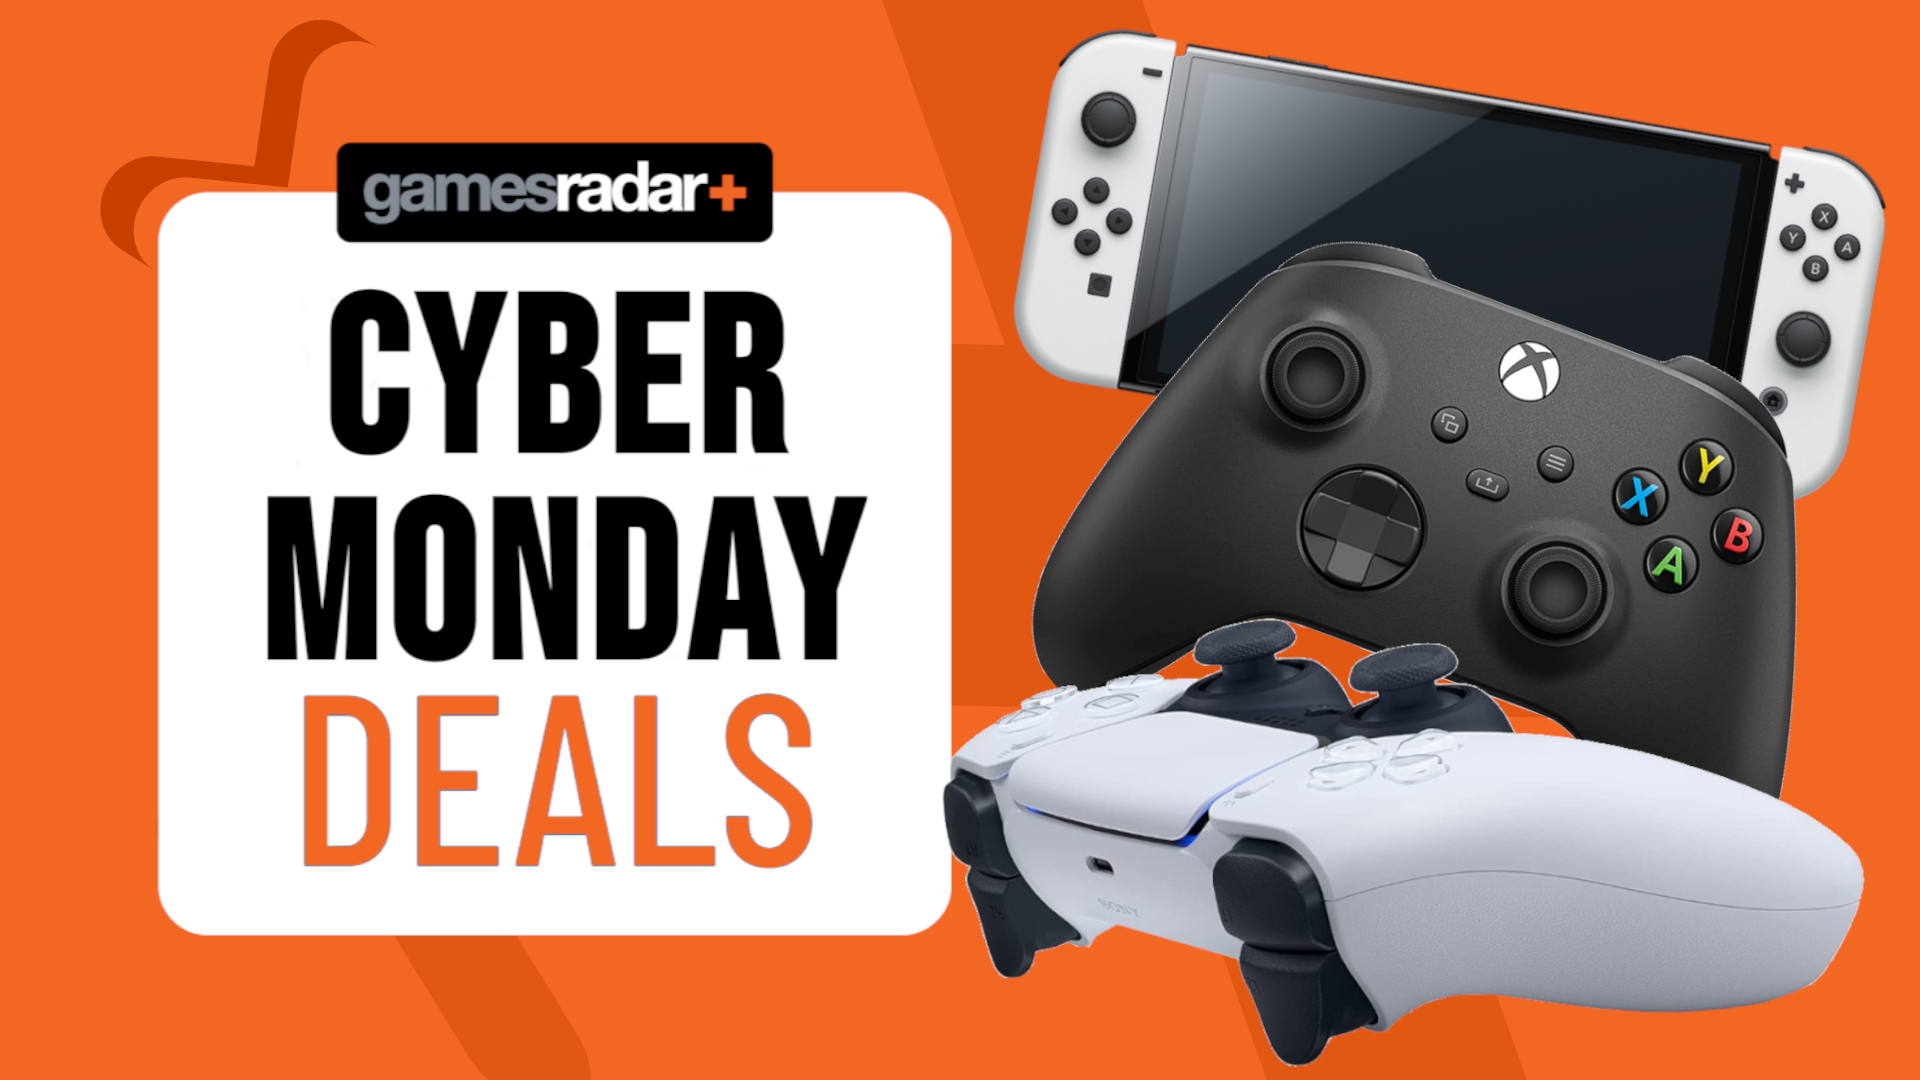 Last-Minute Xbox Controller Deals Still Available For Cyber Monday